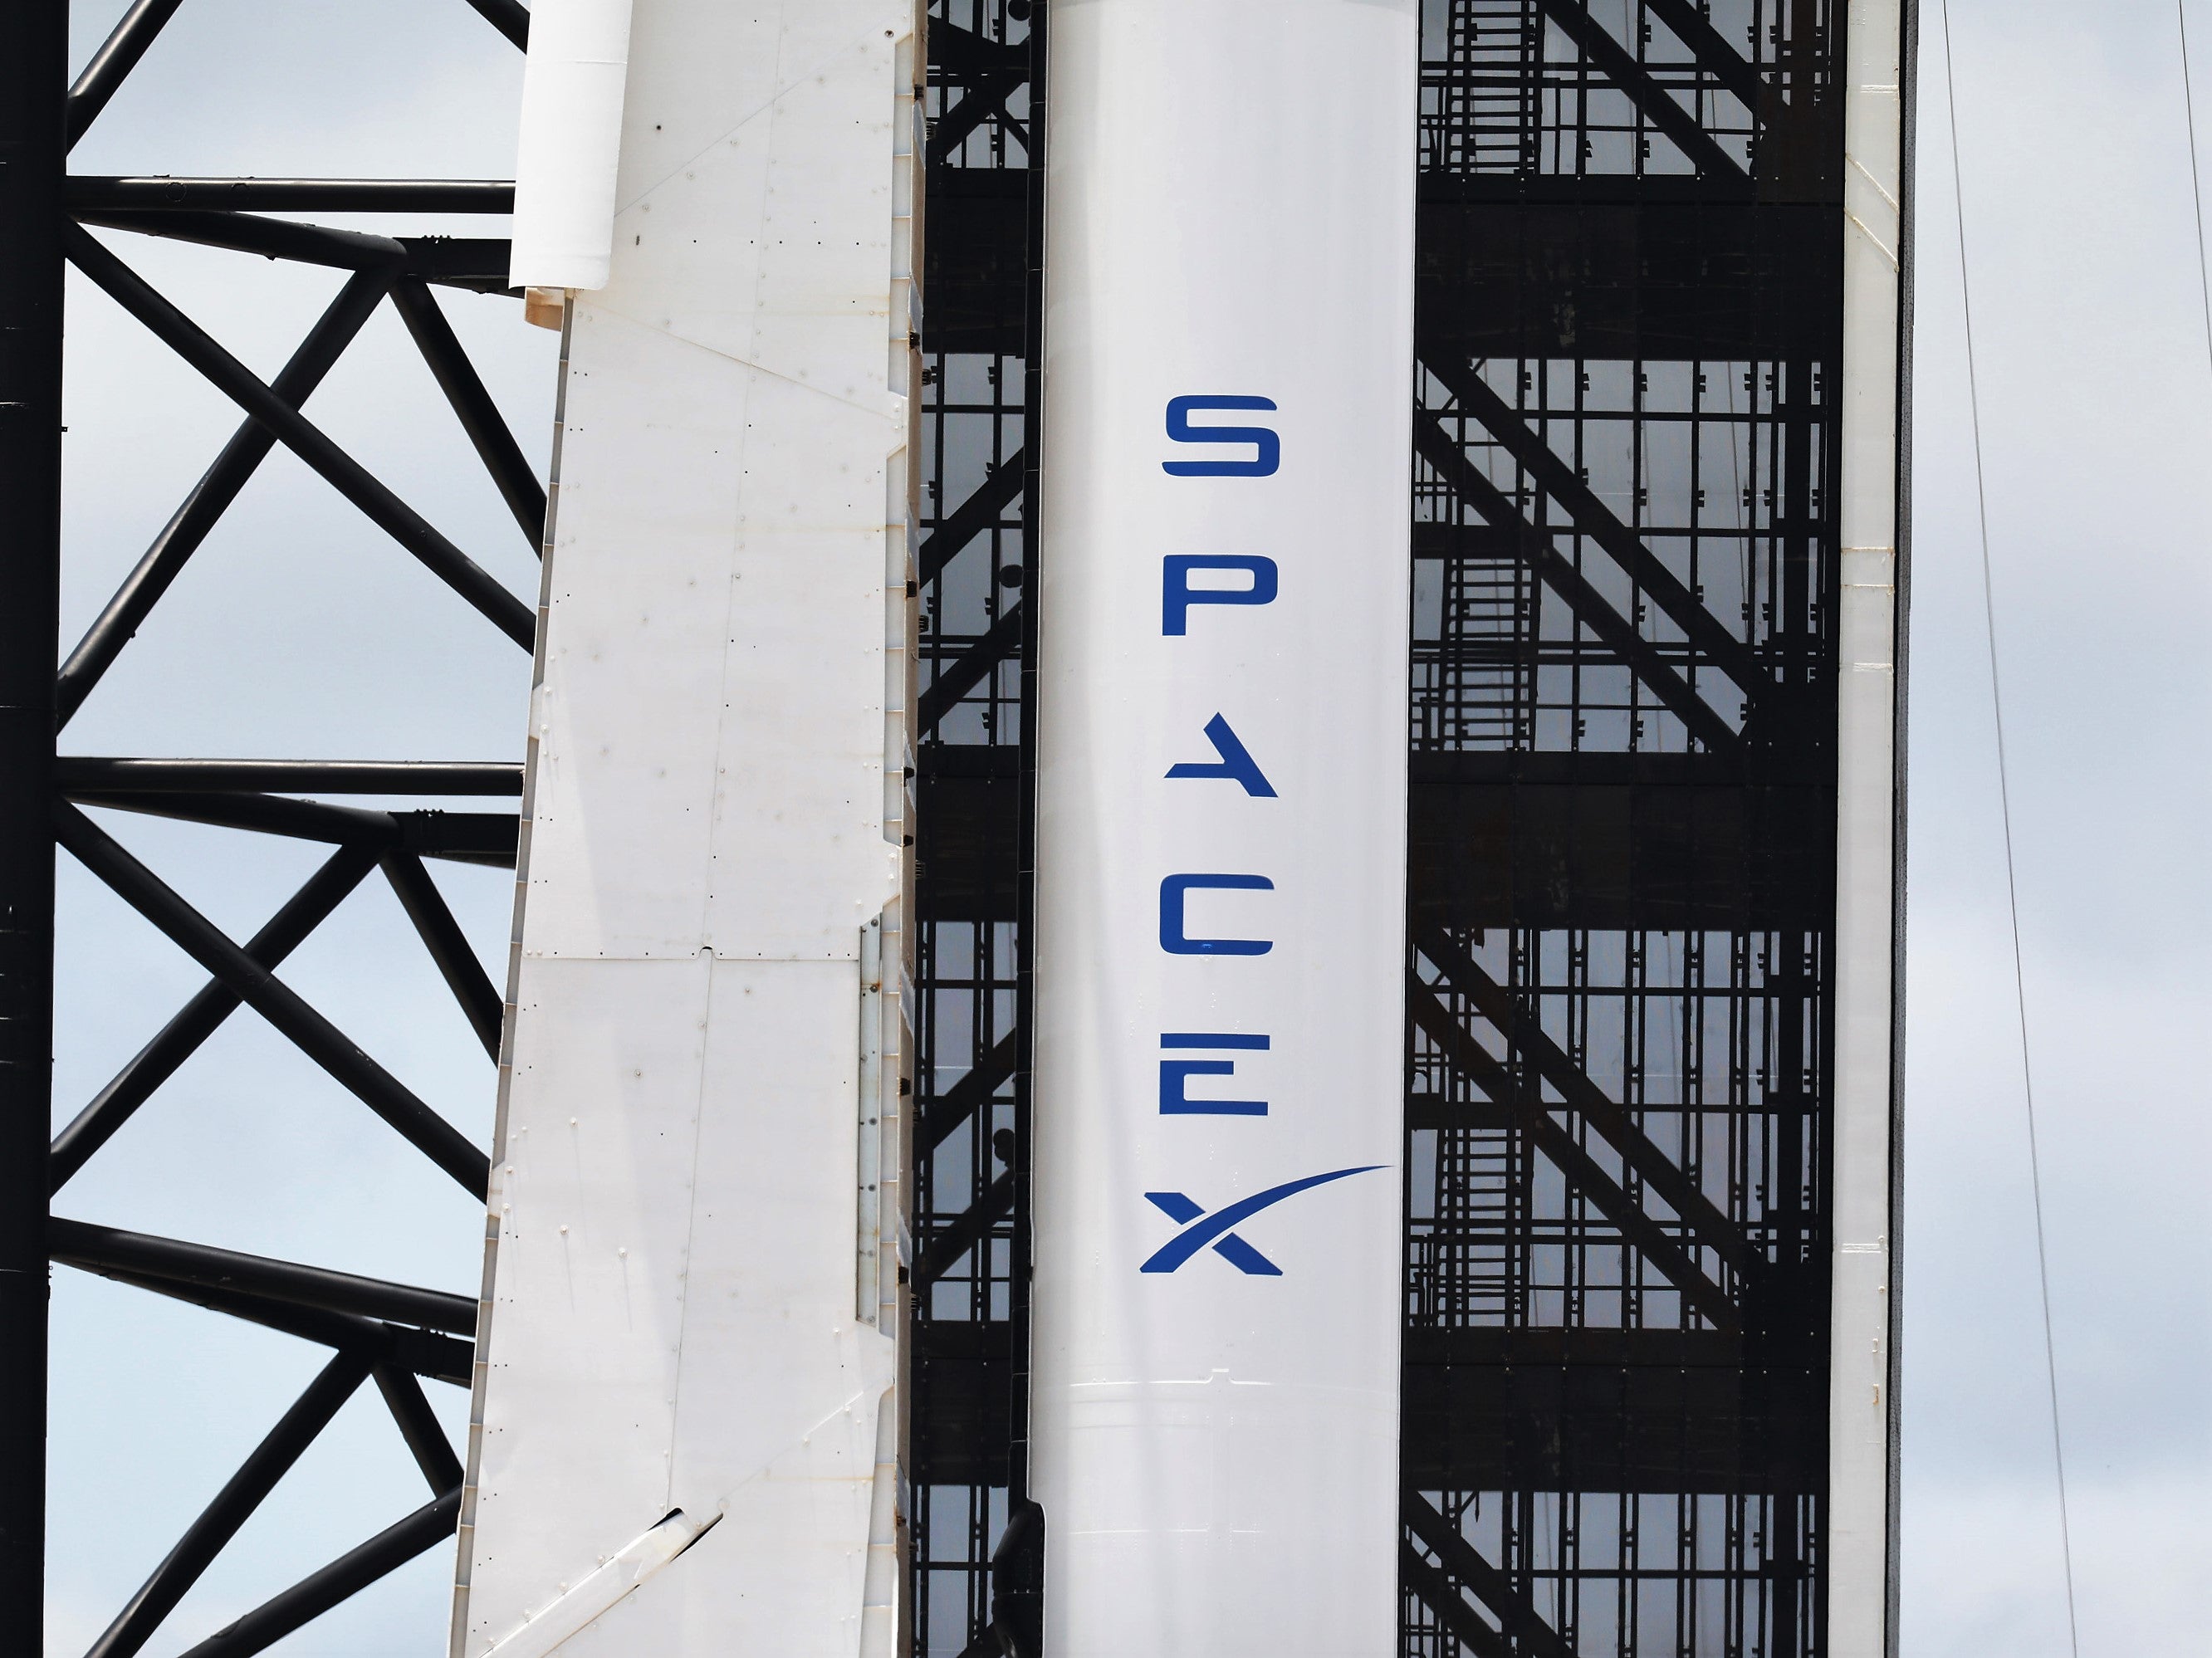 rt of the SpaceX Falcon 9 rocket with the Crew Dragon spacecraft attached is seen on launch pad 39A at the Kennedy Space Center on 29 May, 2020 in Cape Canaveral, Florida